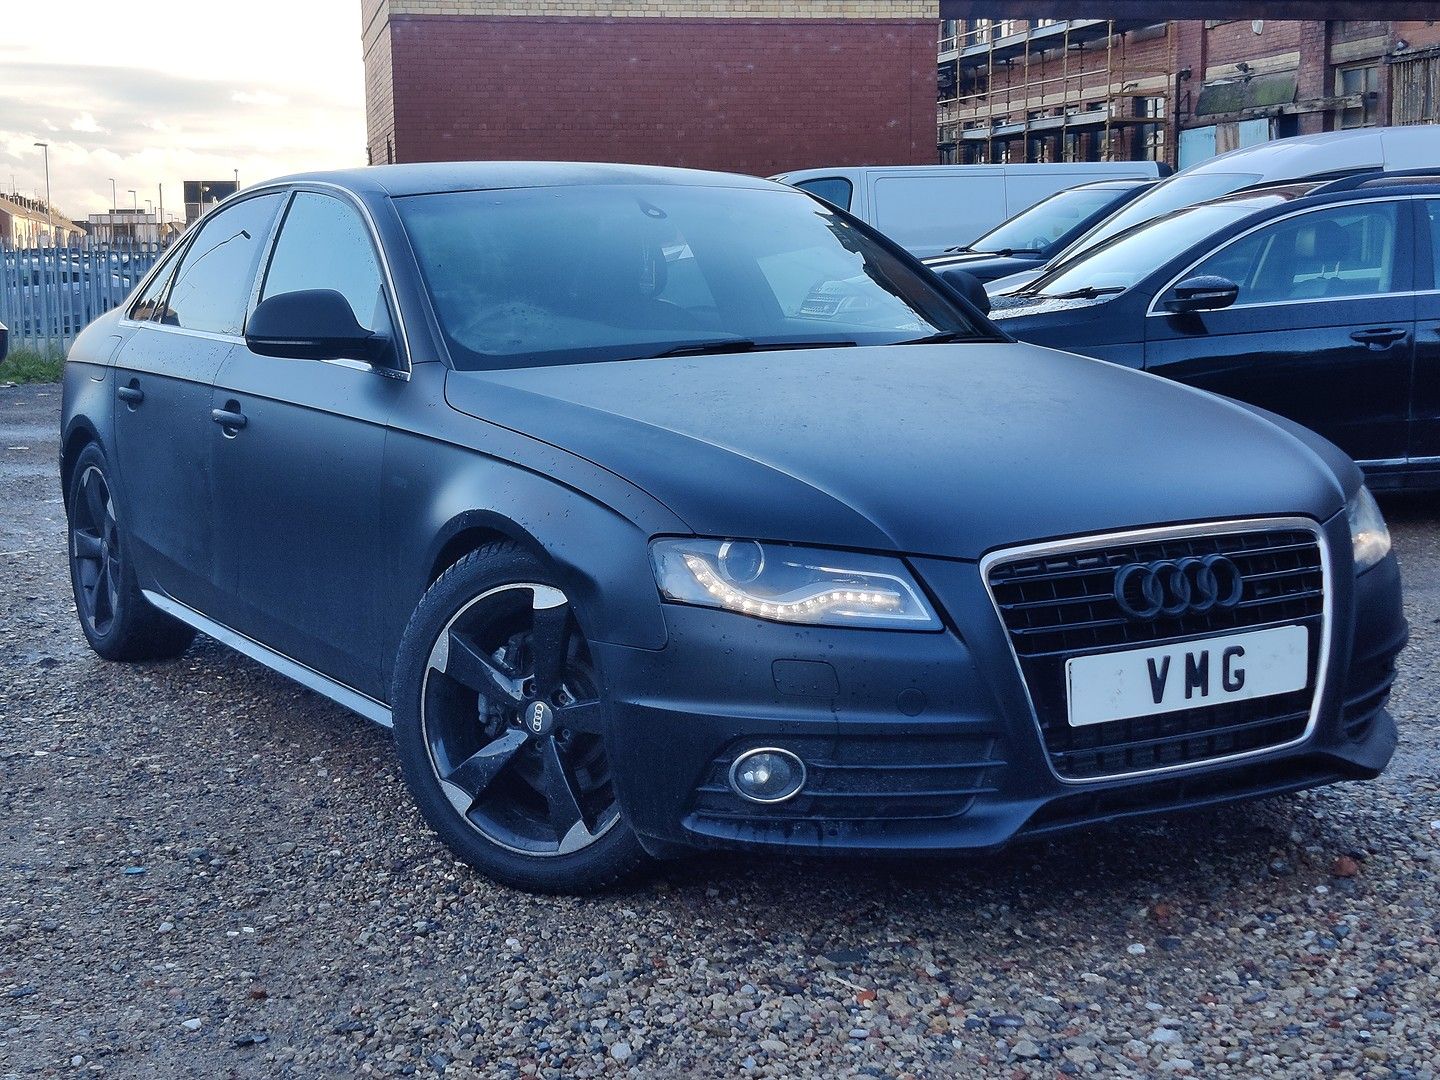 AUDIA4S line 2.0TDI 143PS for sale